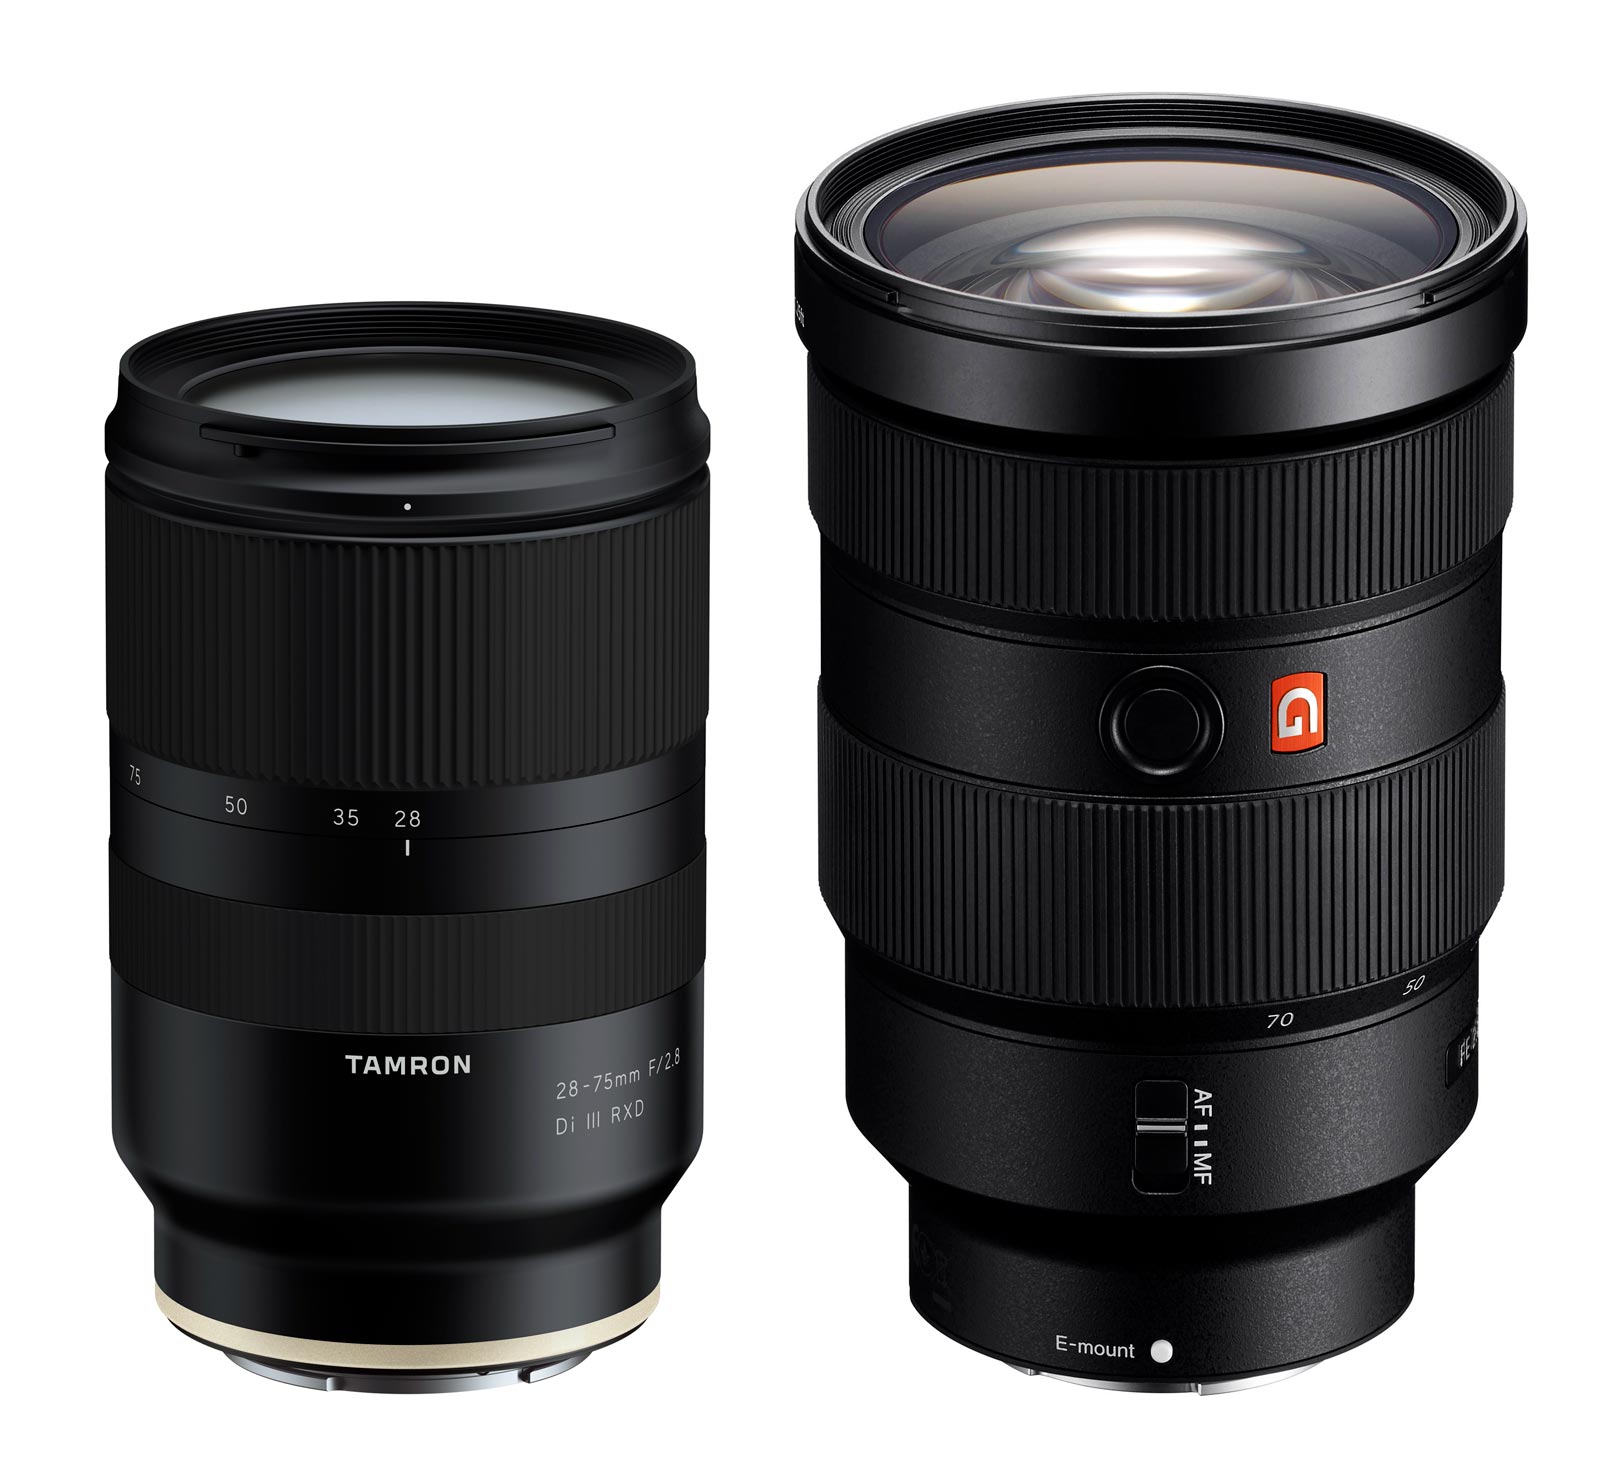 New Tamron 28-75 f/2.8 Lens: Their First for Sony FE-Mount - Light